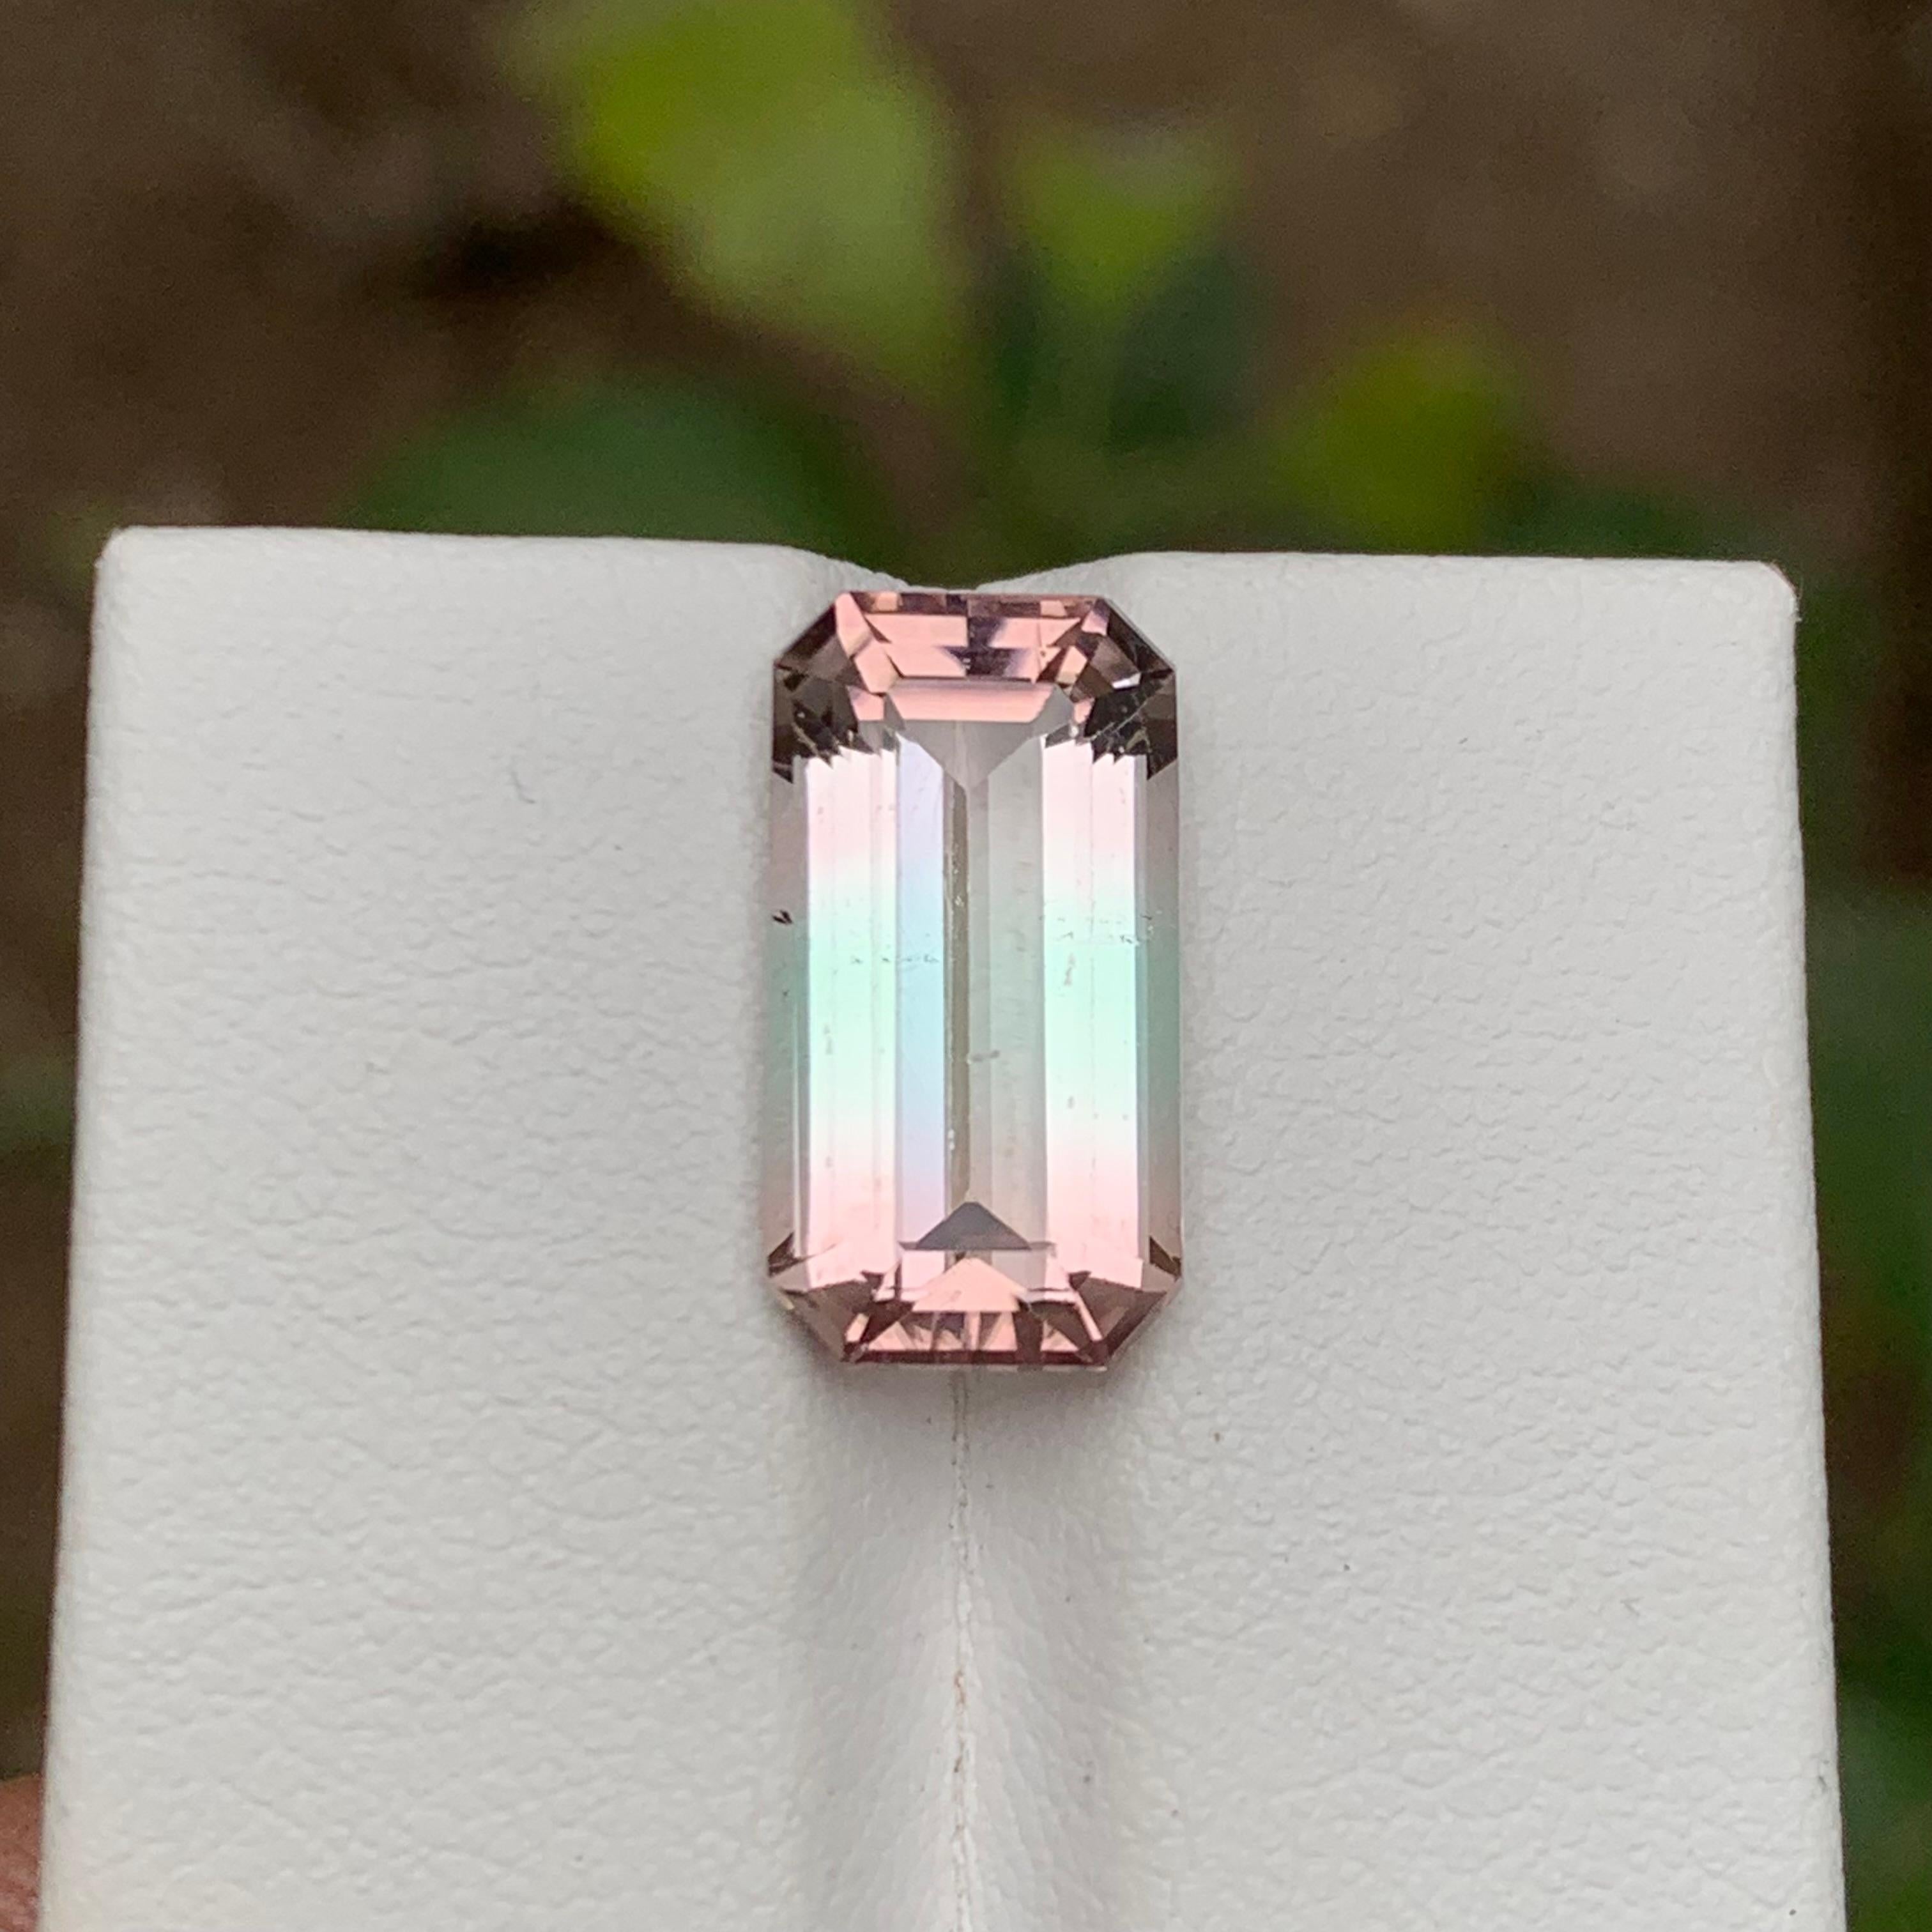 Rare Bicolor Natural Tourmaline Gemstone, 7 Ct Step Emerald Cut for Pendant/Ring For Sale 6